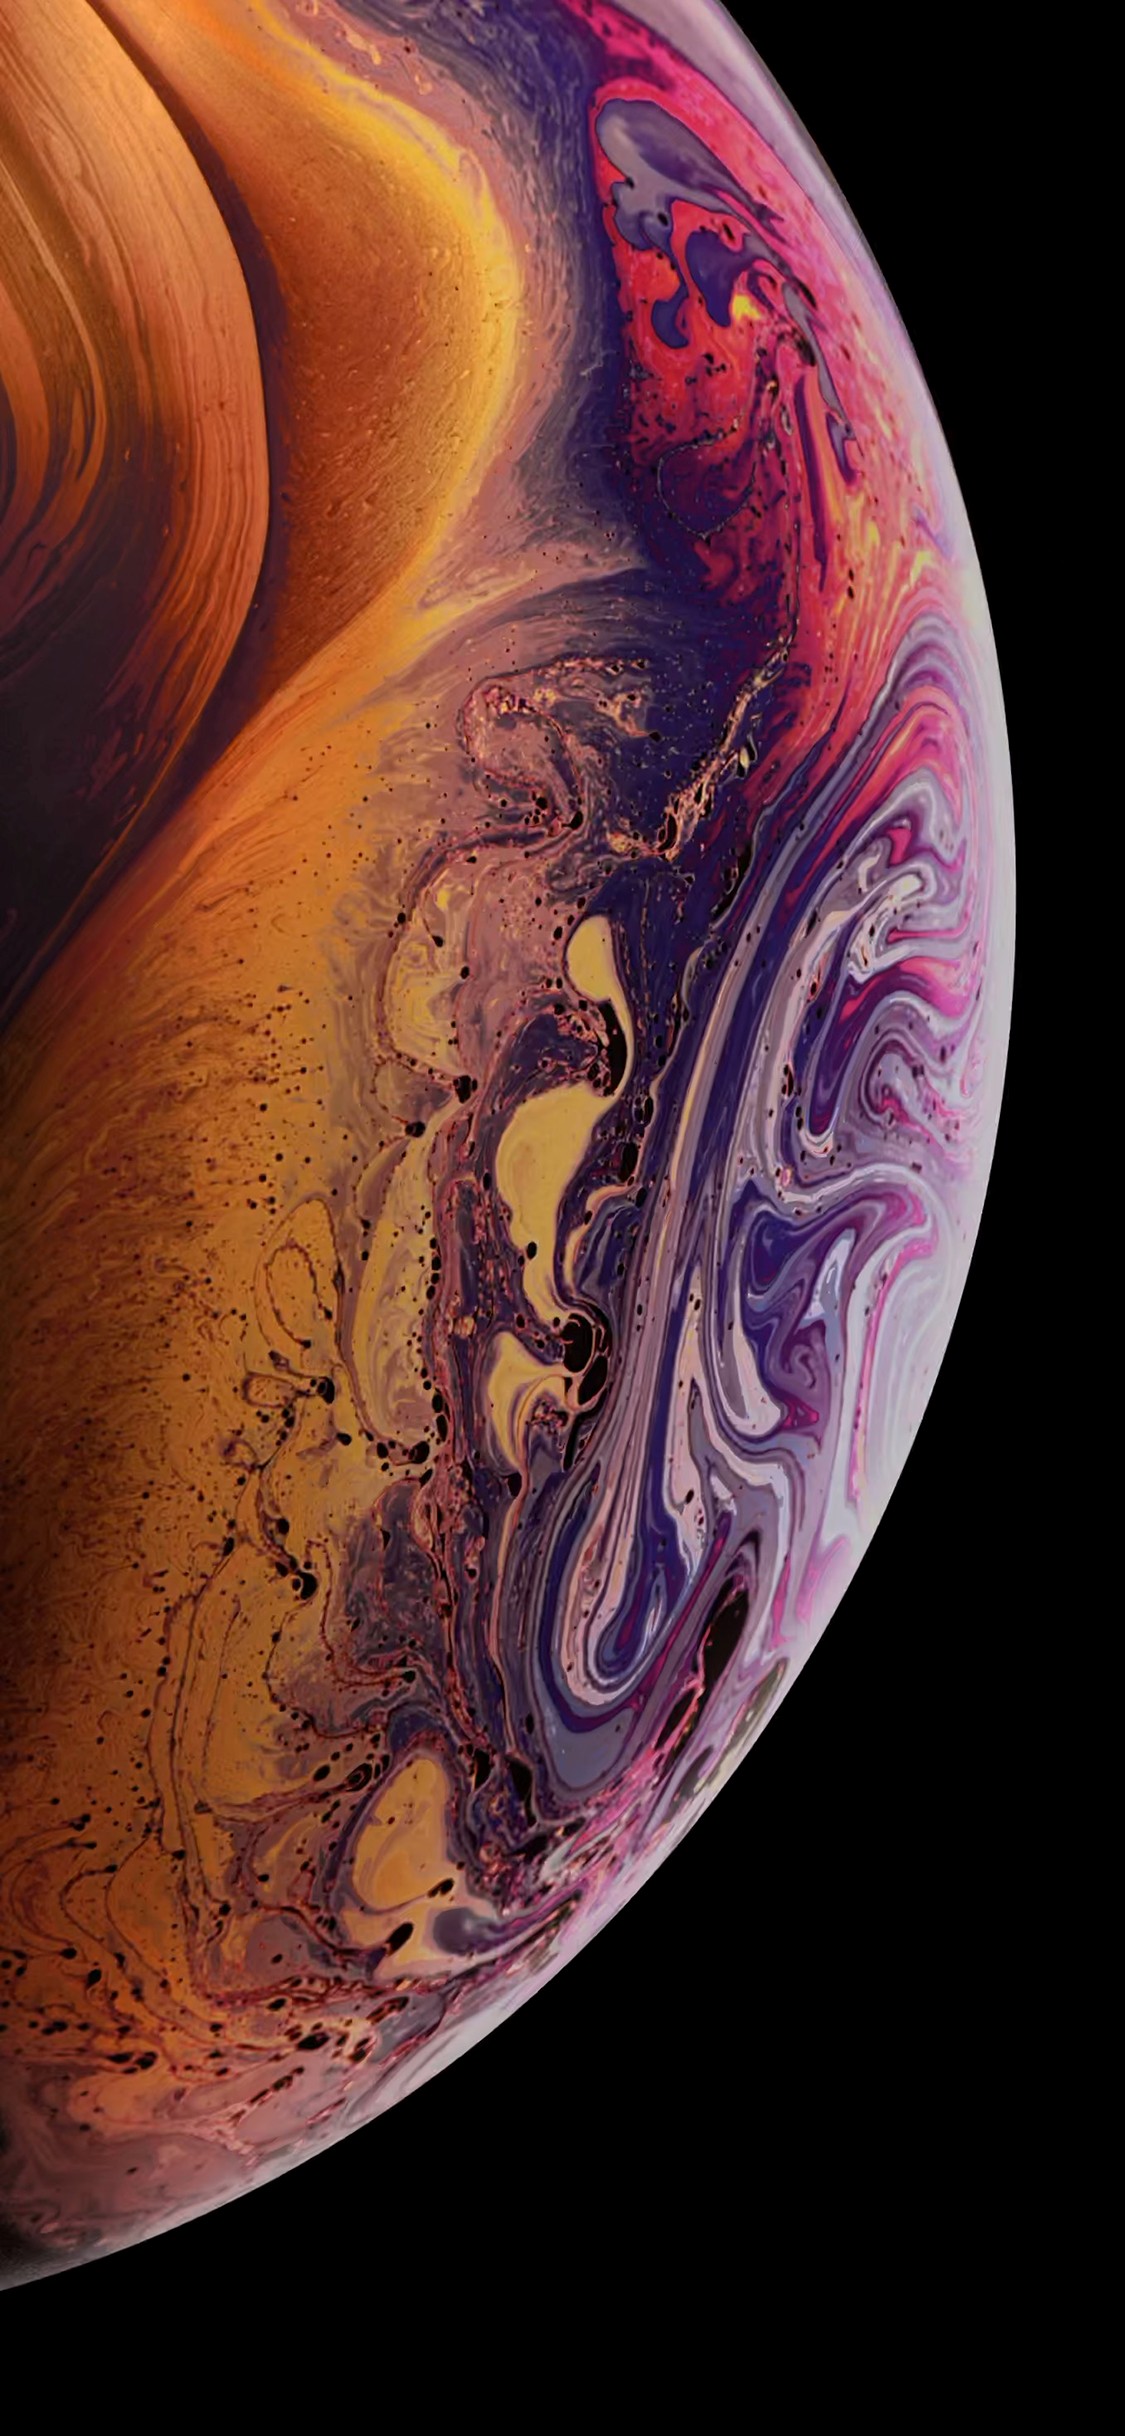 Iphone xs wallpapers hd. 😍 IPhone XS